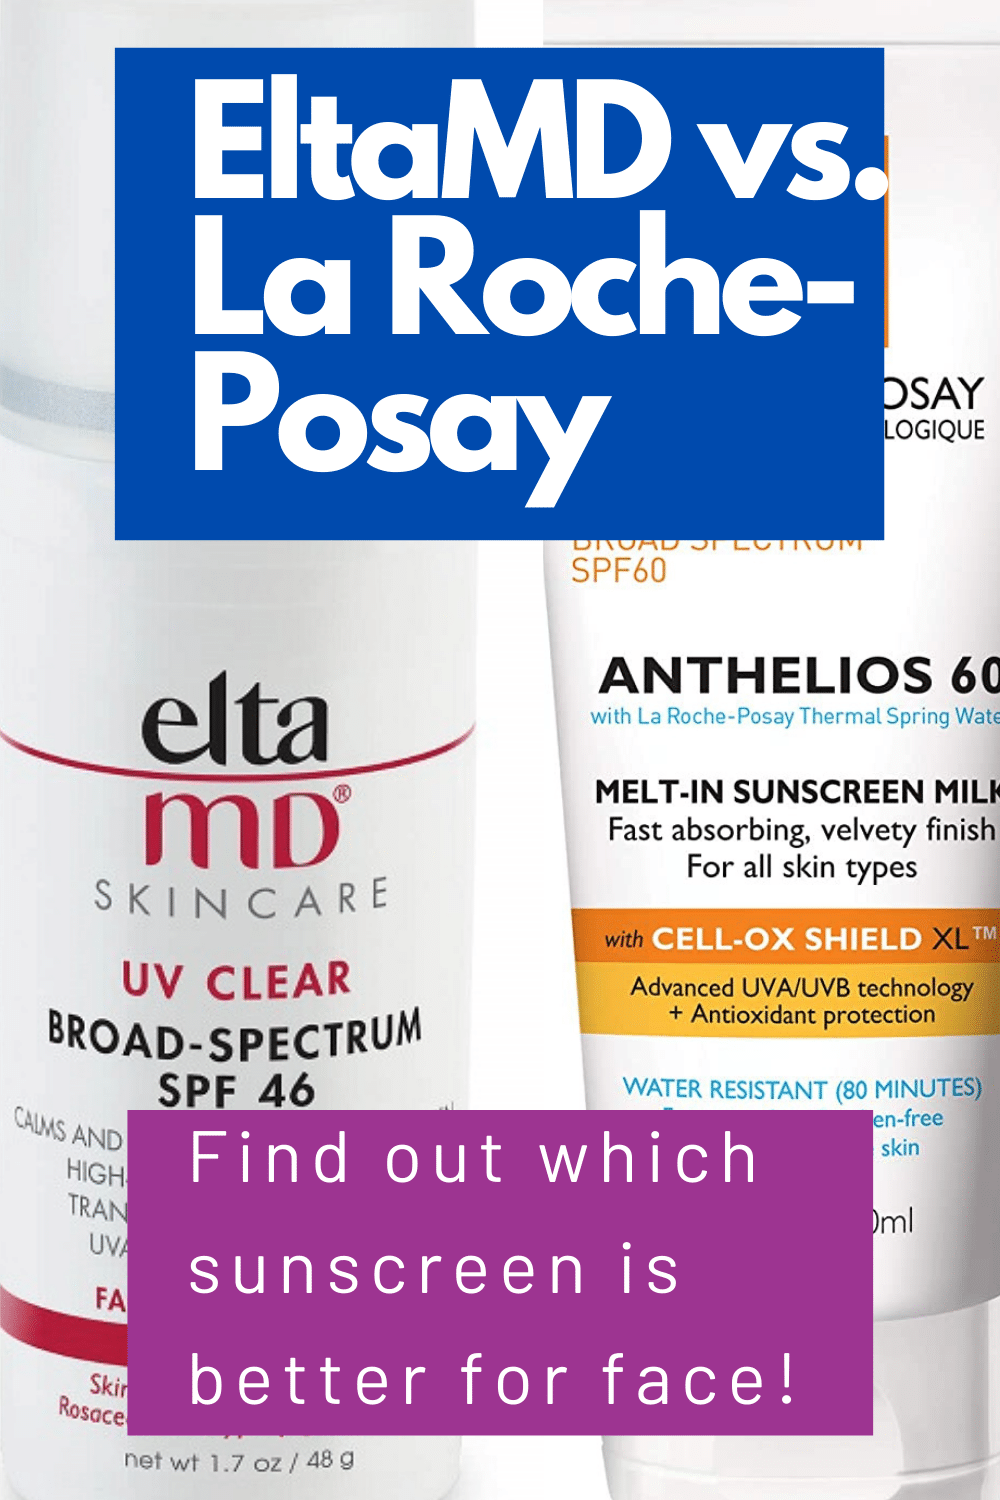 Elta MD vs La Roche-Posay Sunscreen for Face by Very Easy Makeup